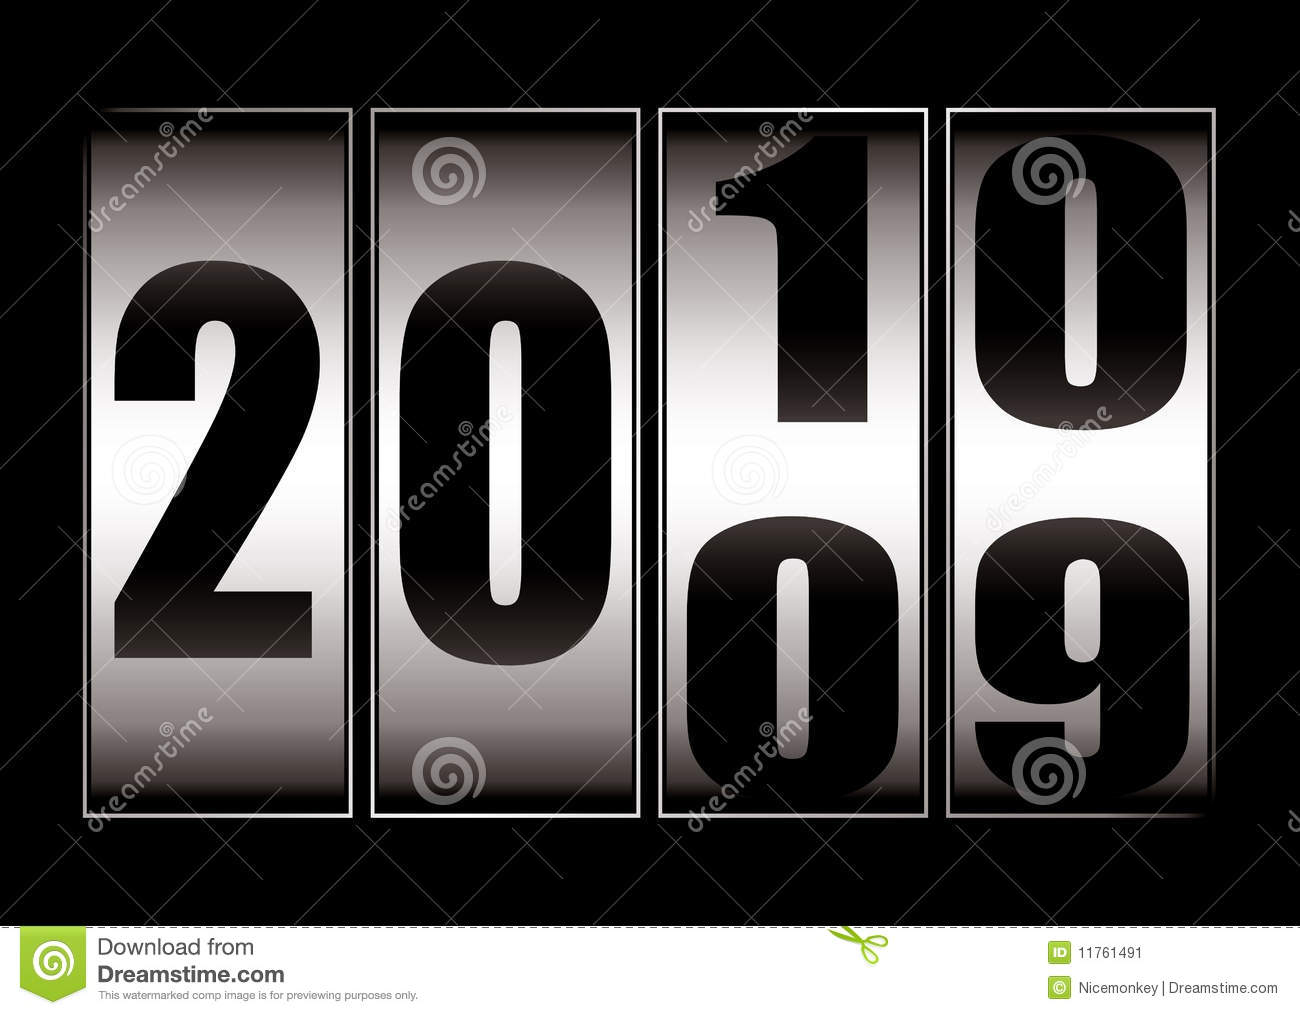 Date Change 9 To 10 Stock Image   Image  11761491